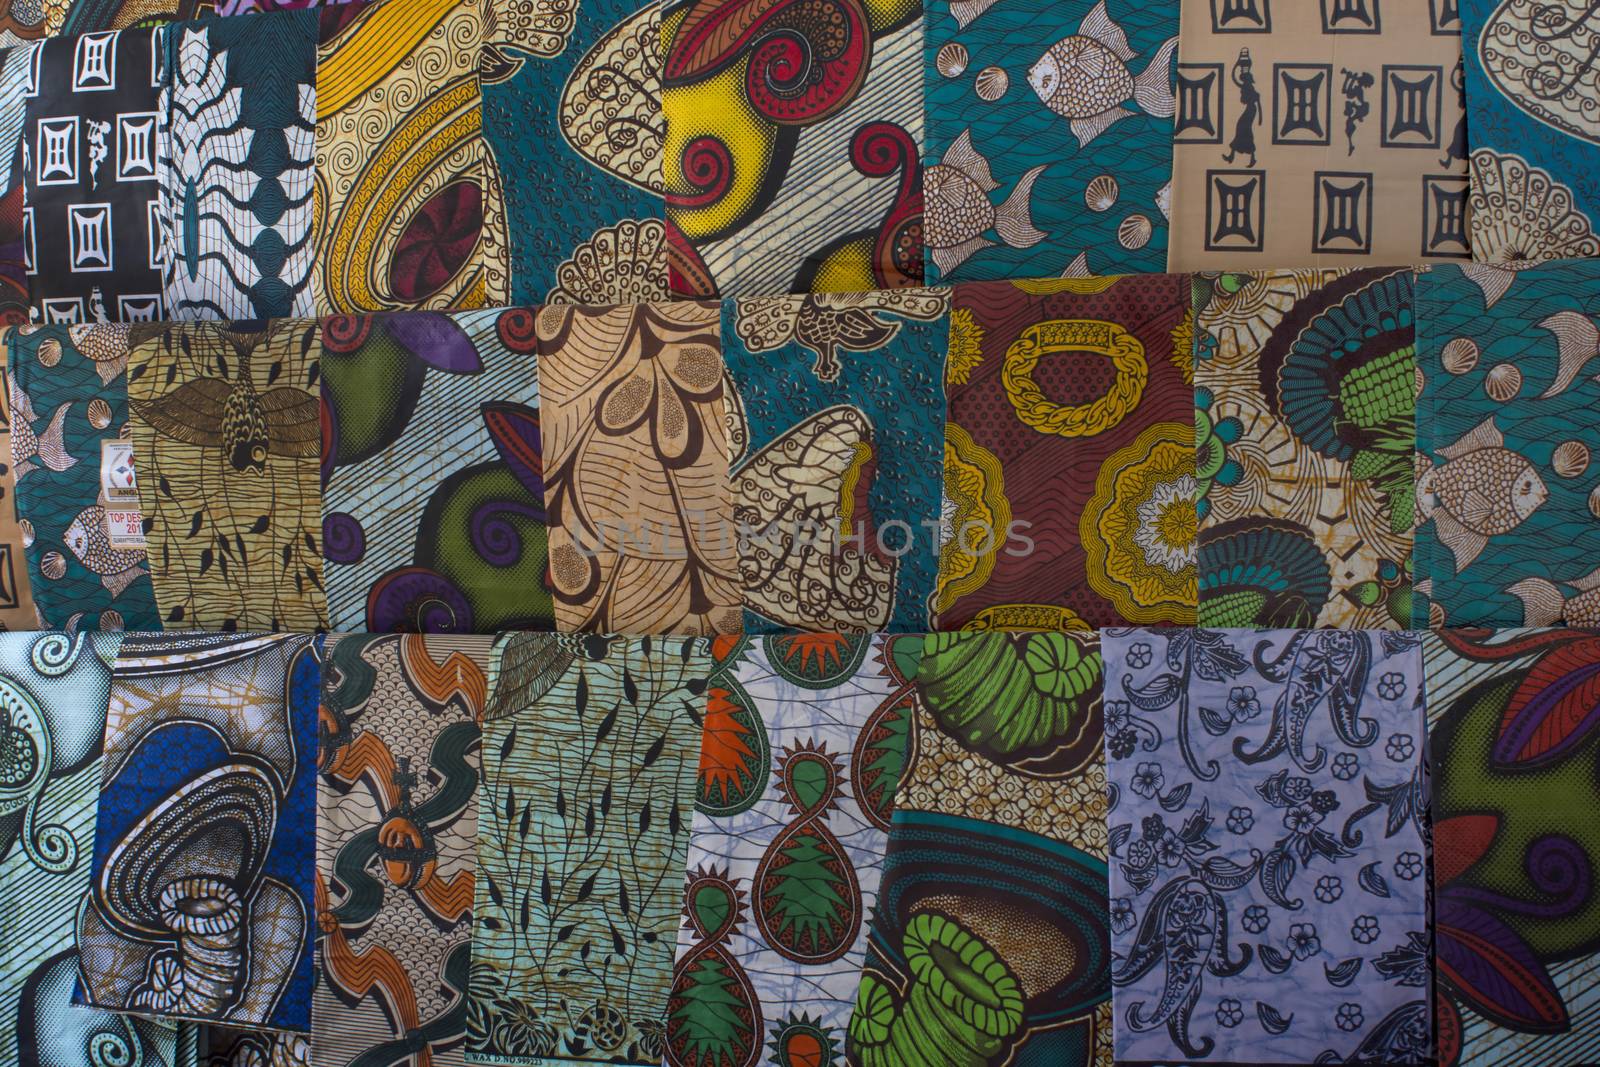 African fabrics on display in a Zambia market